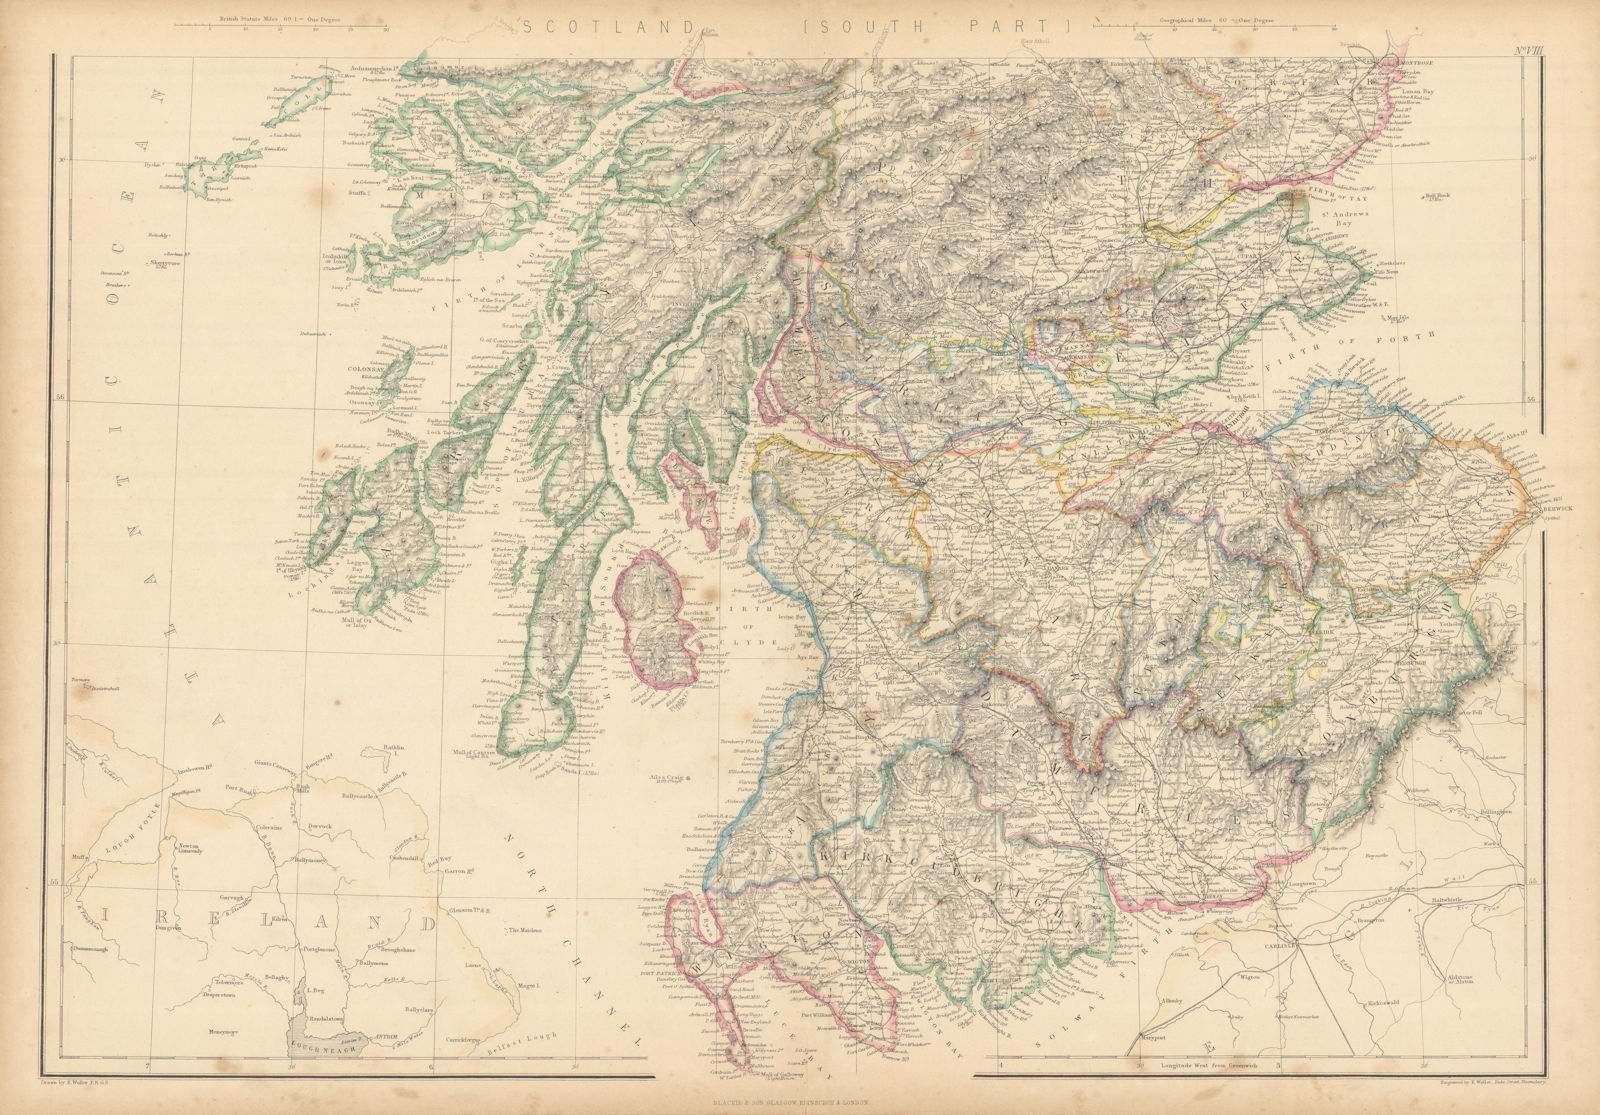 Scotland (South) by Edward Weller. Borders Lothian Central Strathclyde 1859 map